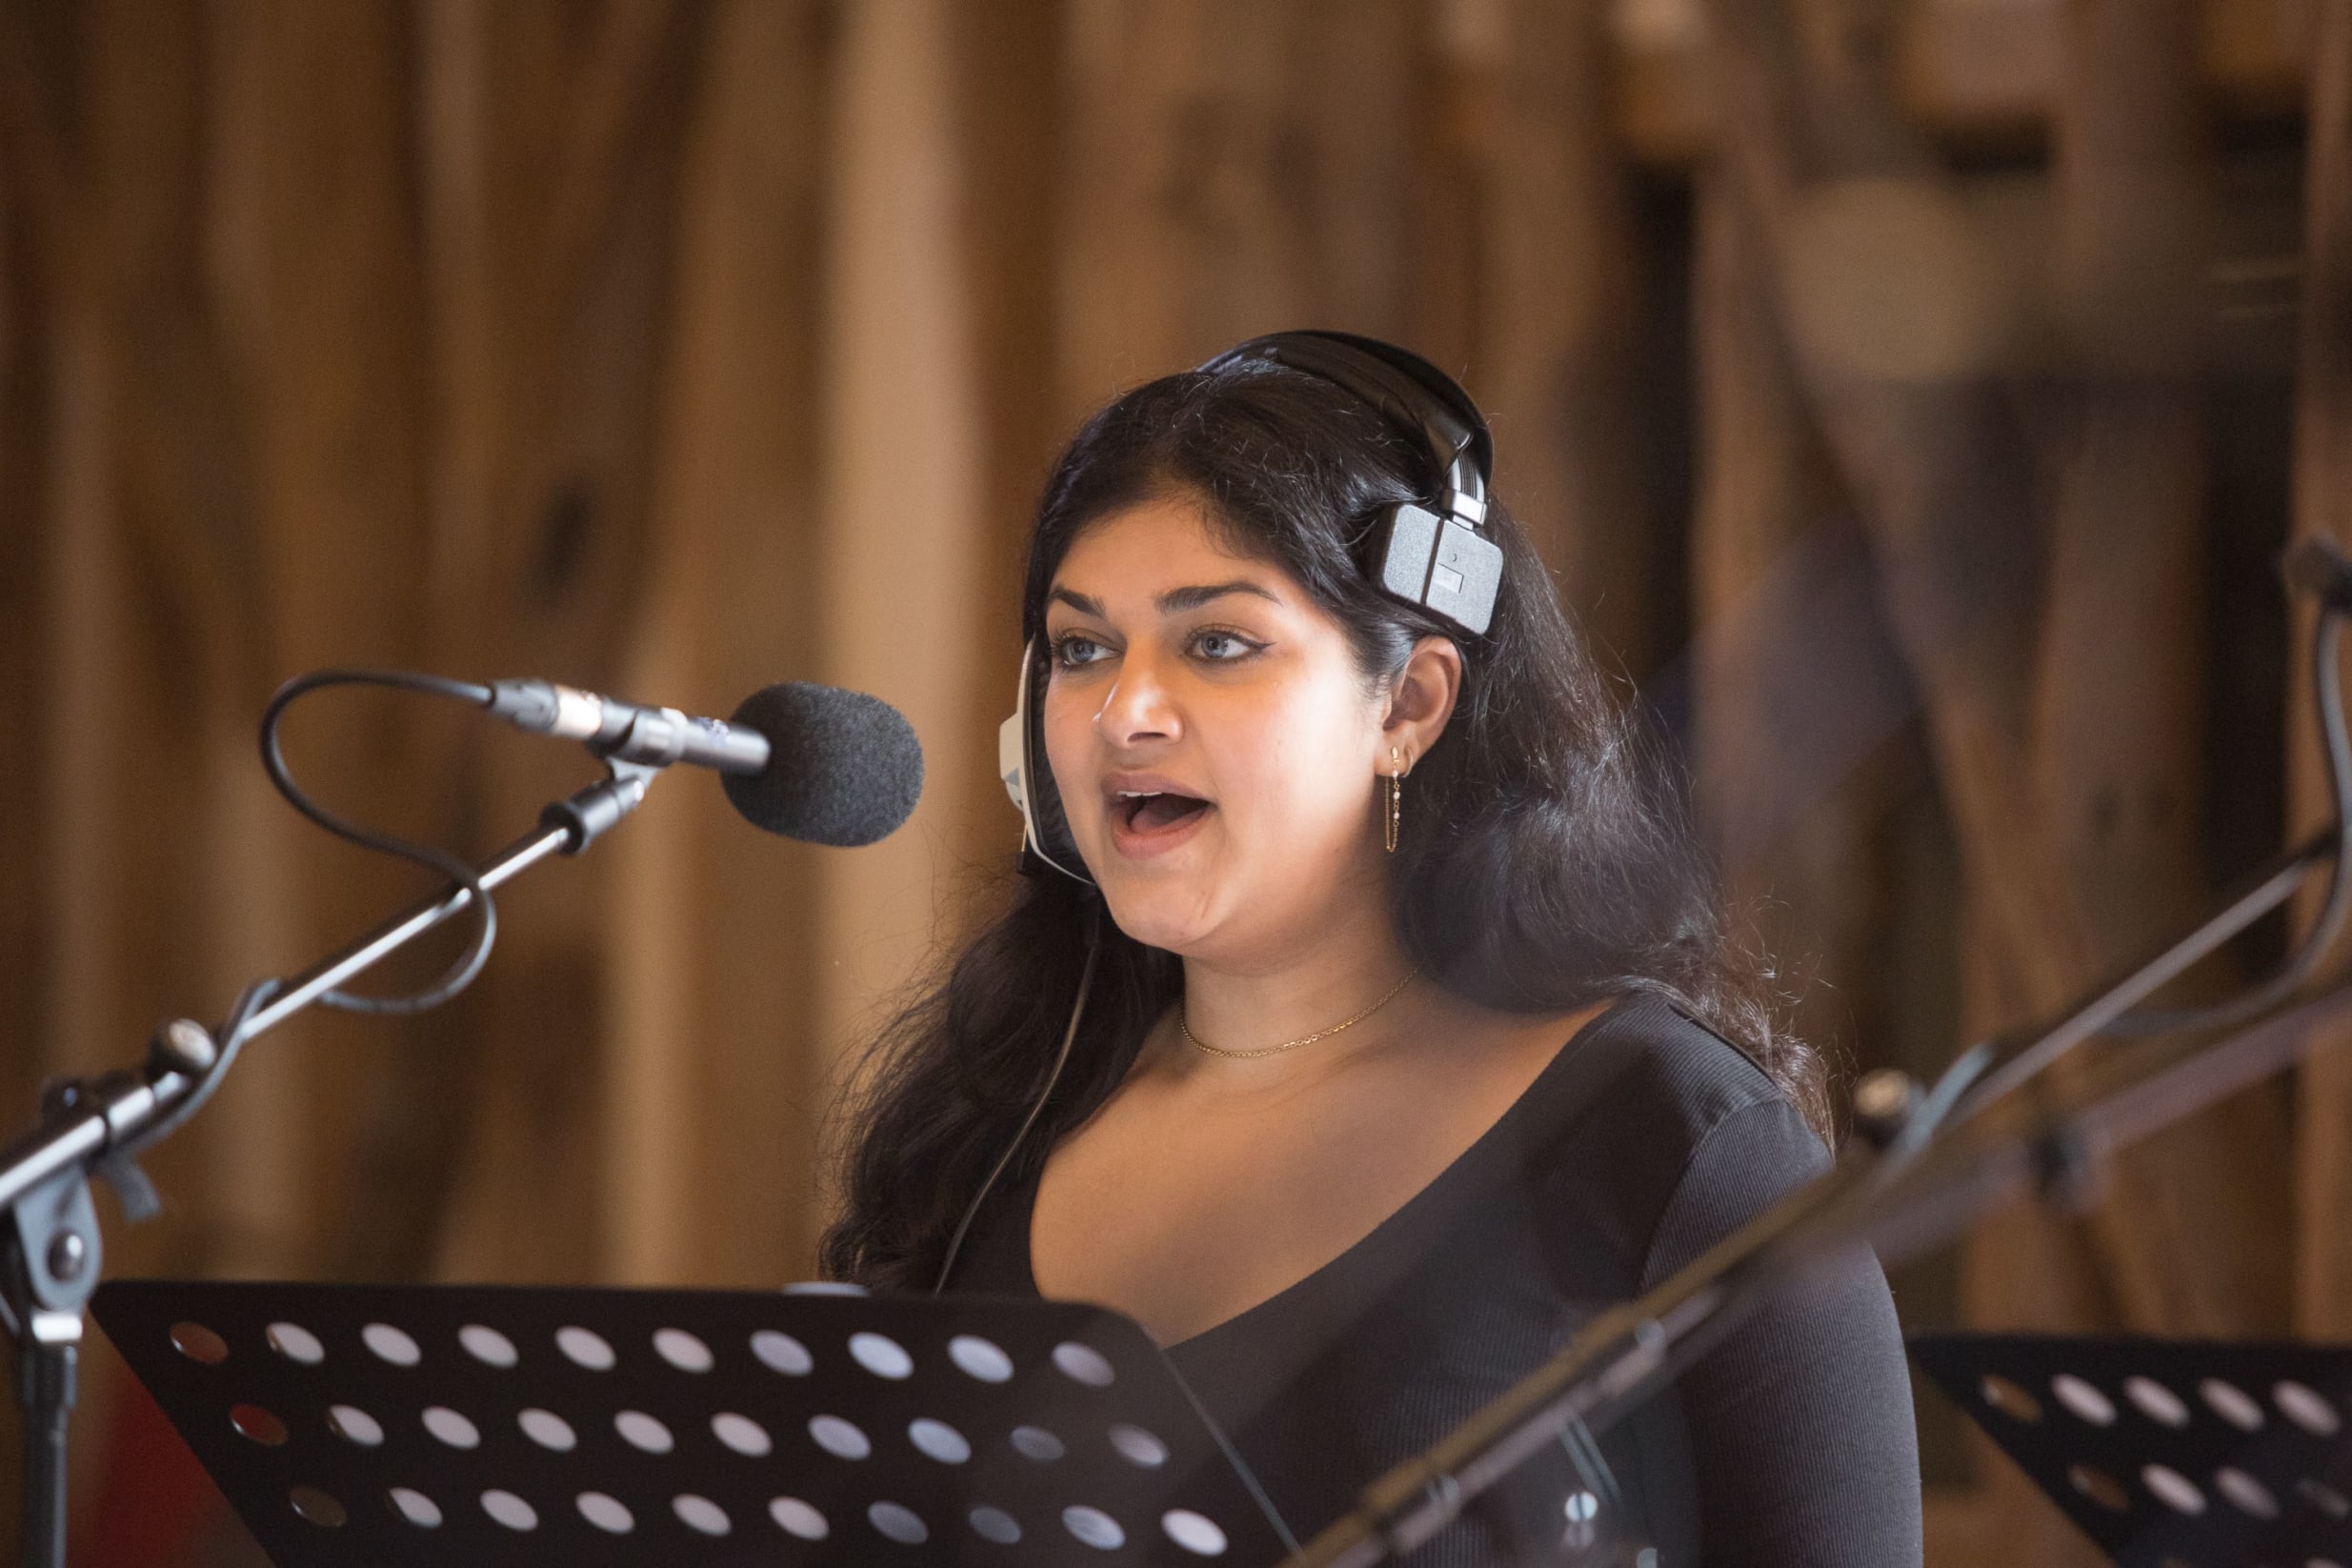 Action shot of Sarina, a south asian woman with long dark hair, singing in a recording studio with a headset